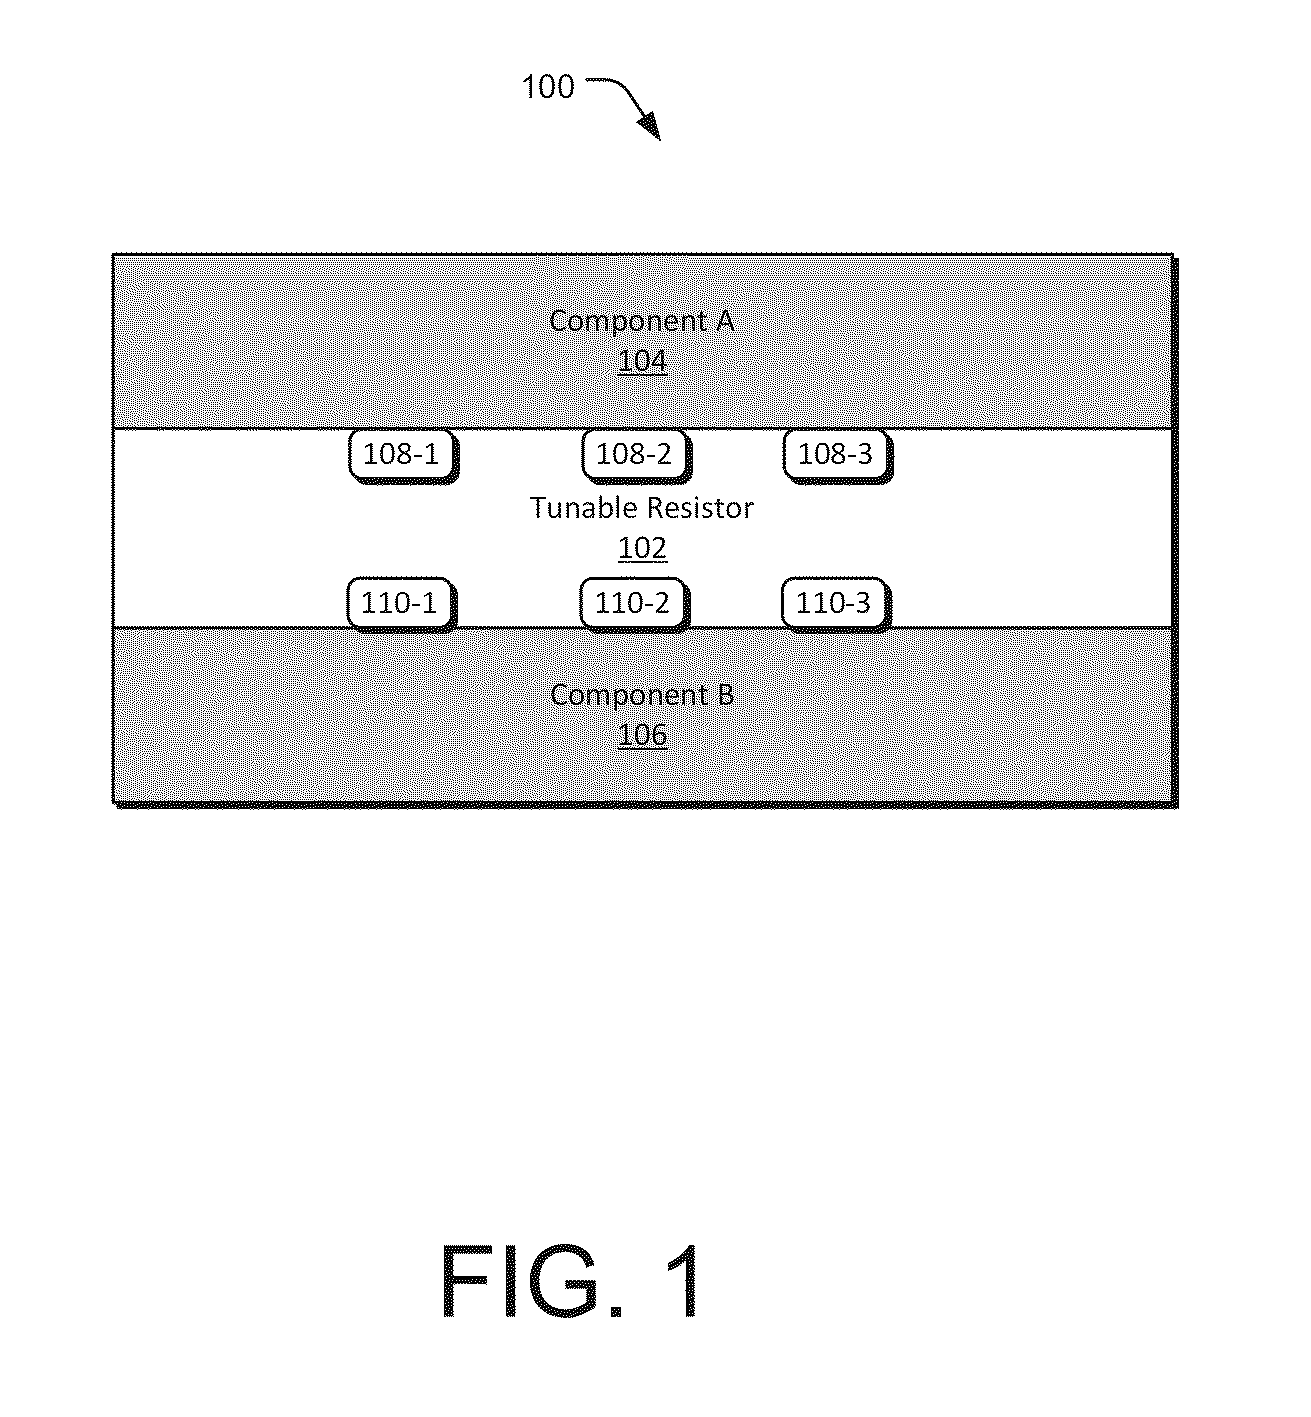 Process tunable resistor with user selectable values